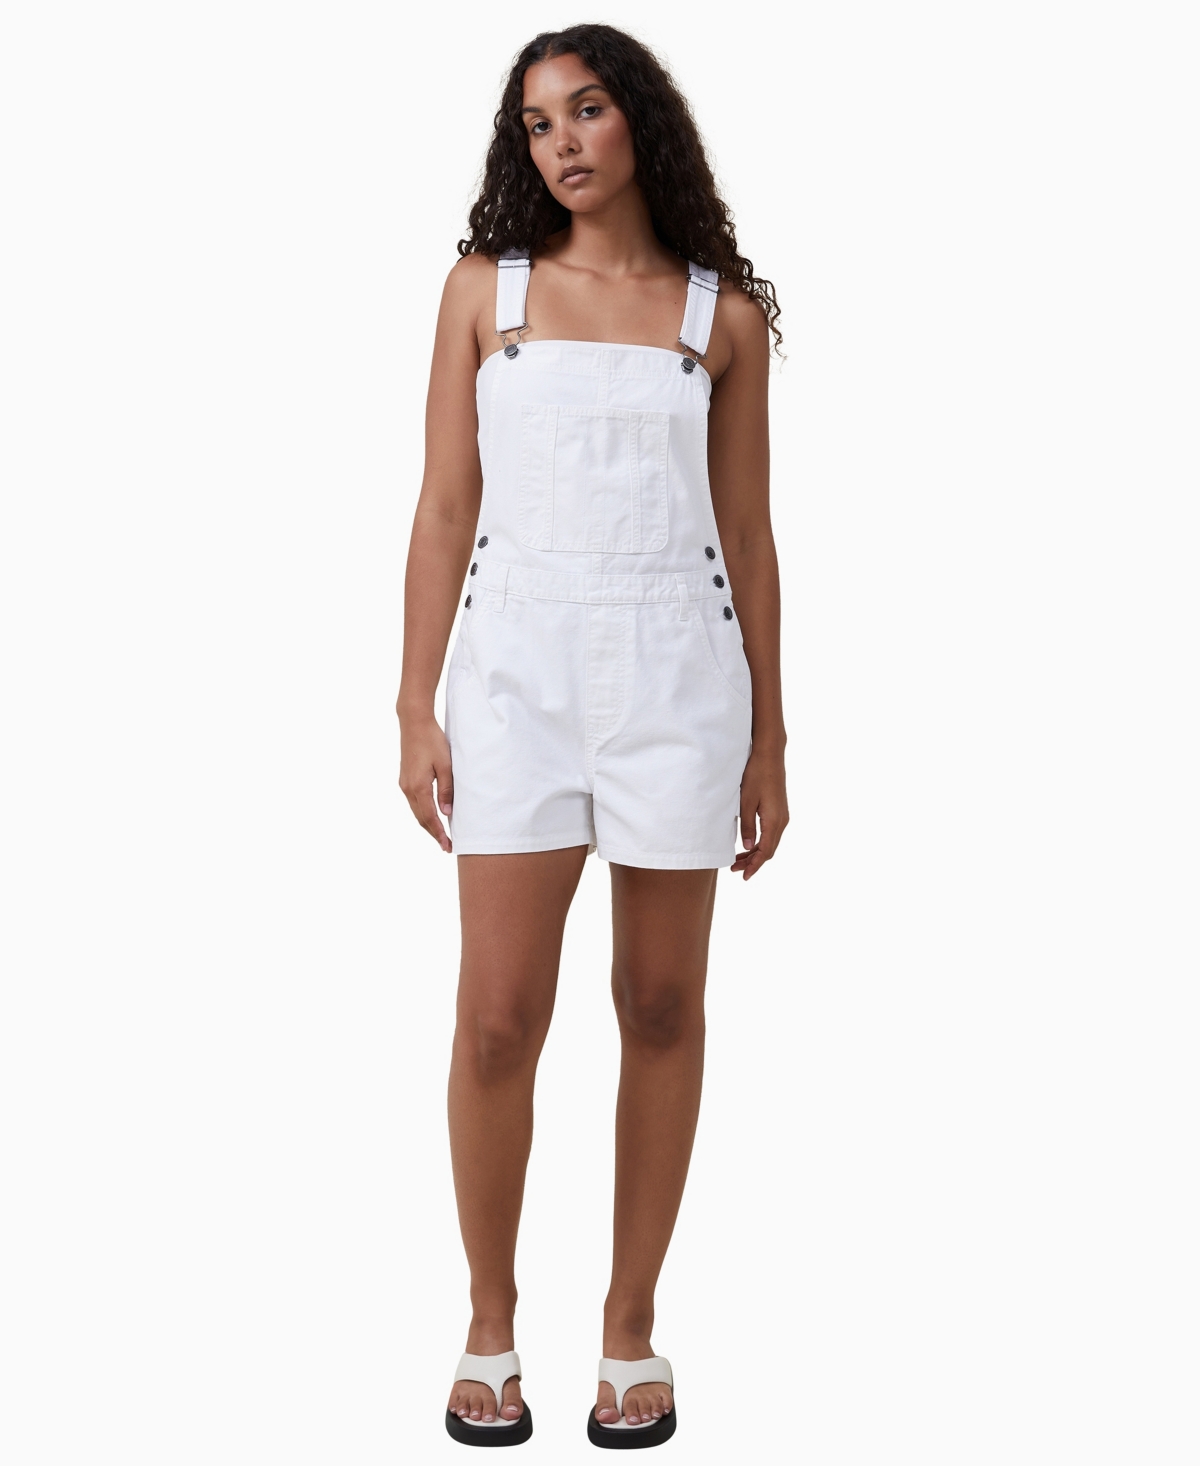 COTTON ON WOMEN'S UTILITY CANVAS OVERALL SHORTS